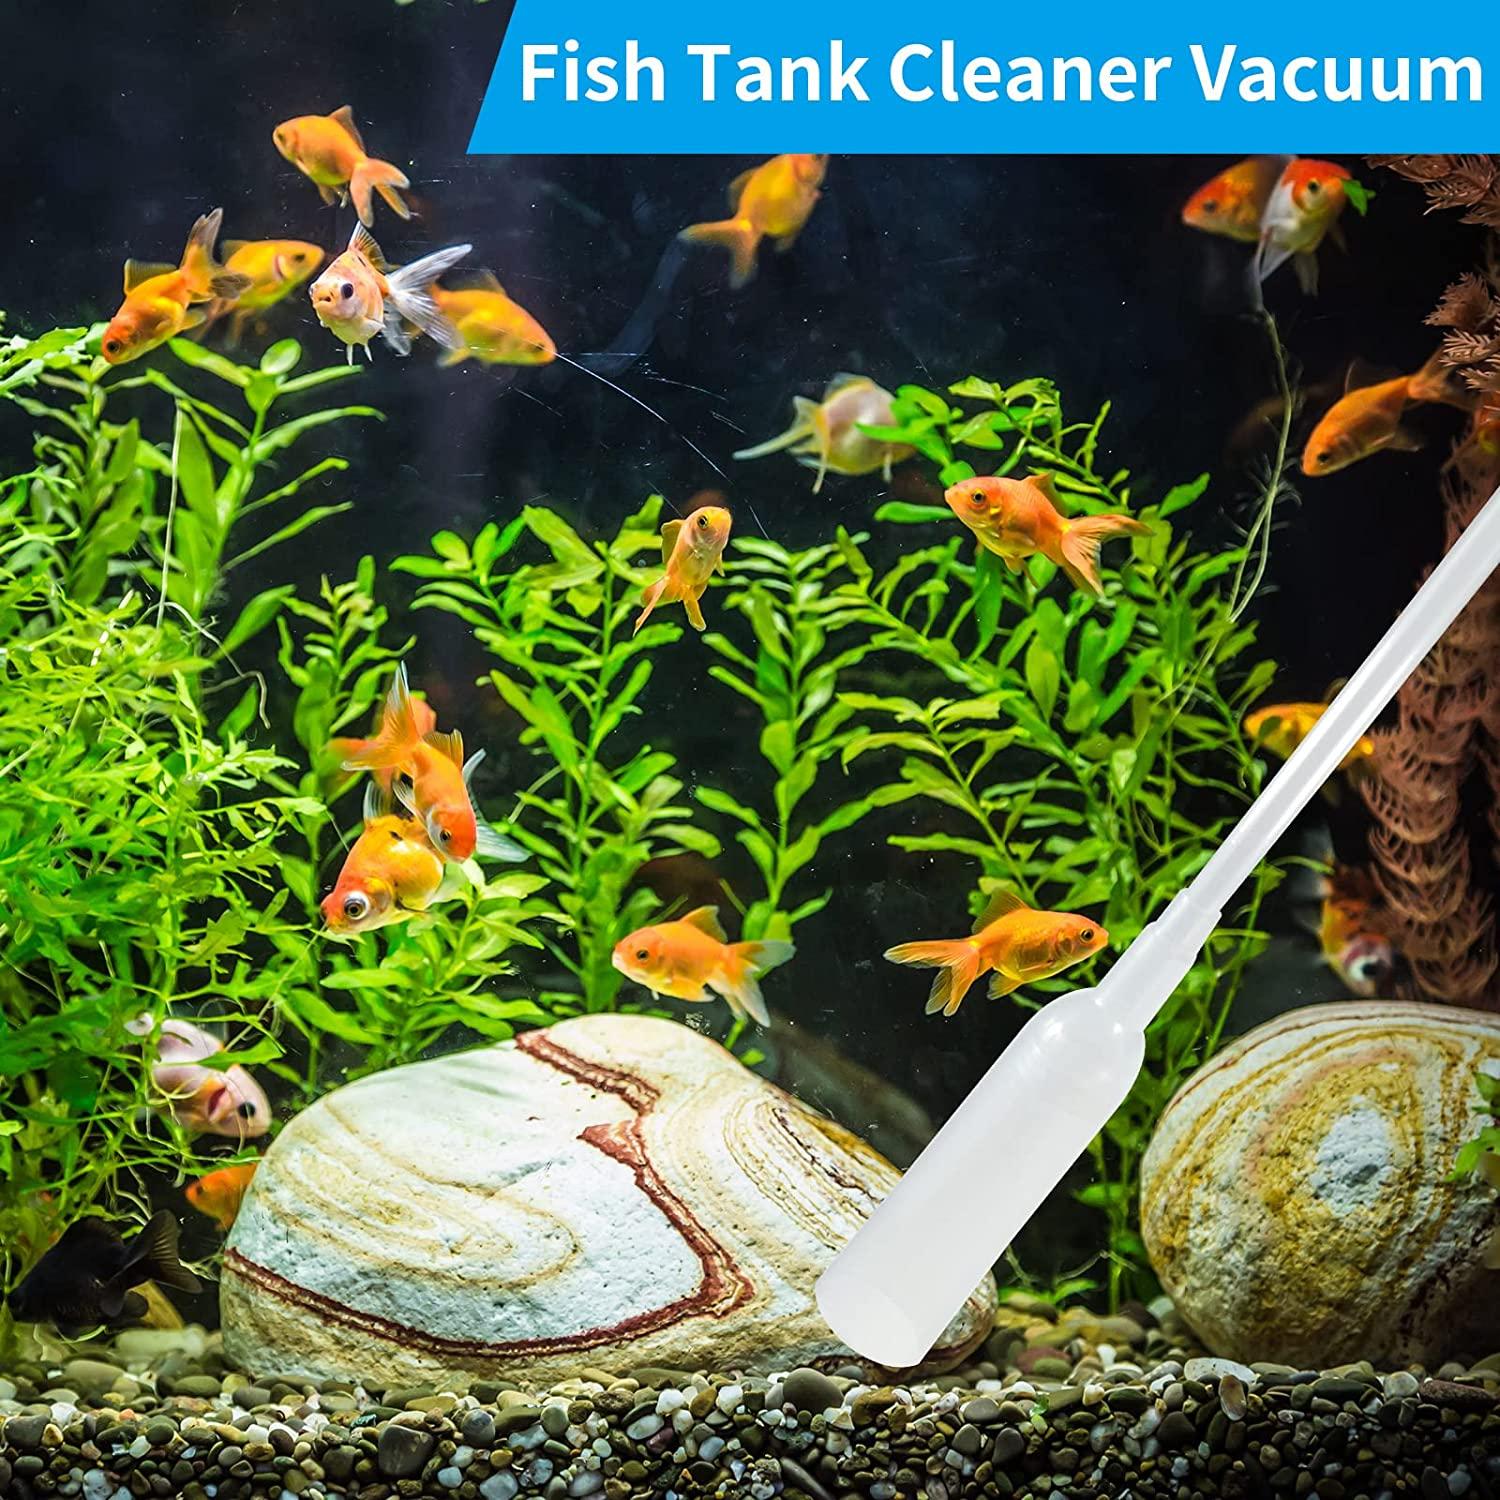 Fish Tank Cleaning Tools, Aquarium Cleaning Kit, Betta Fish Tank Accessories, Aquarium Gravel Algae 5 in 1 Kit for Water Change and Sand Cleaner, Long Siphon Nozzle with Valve